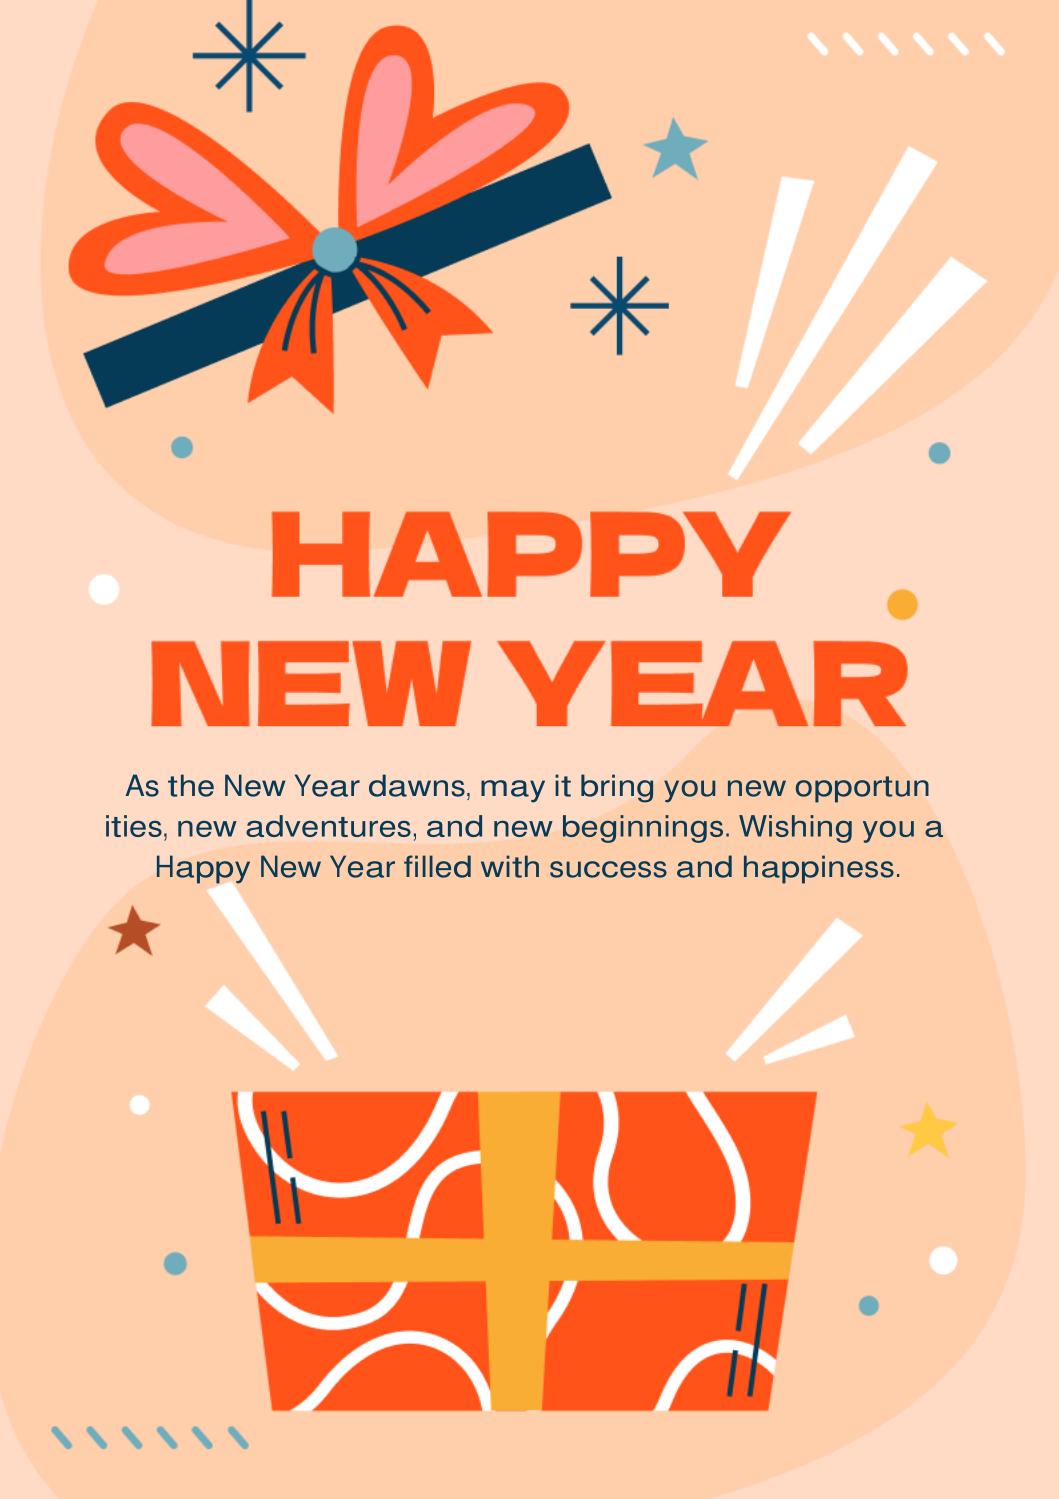 New Year wishes for clients